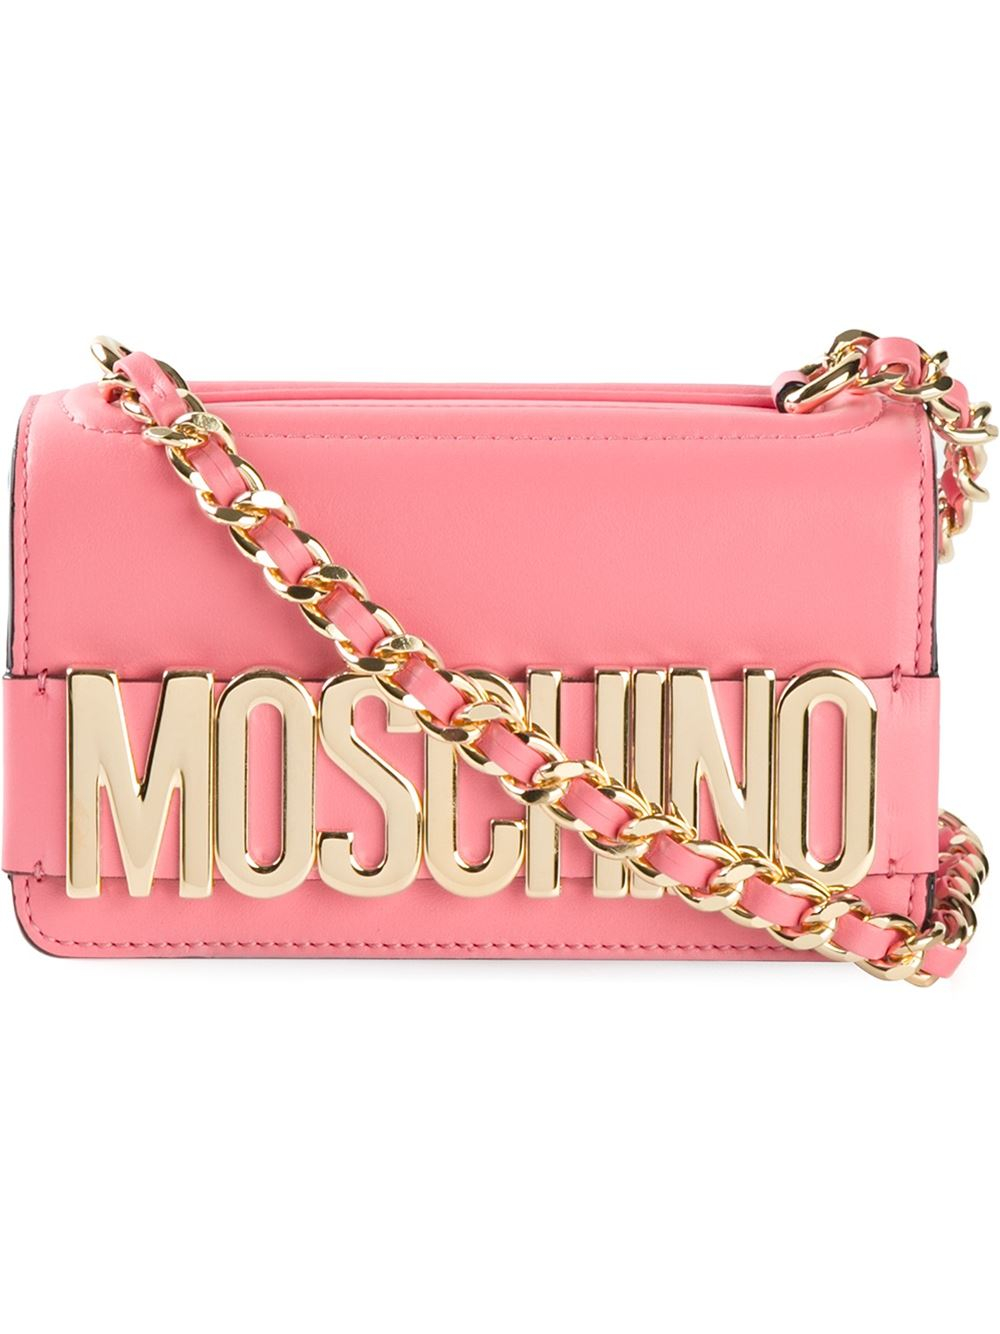 Lyst - Moschino Logo-detail Leather Shoulder Bag in Pink